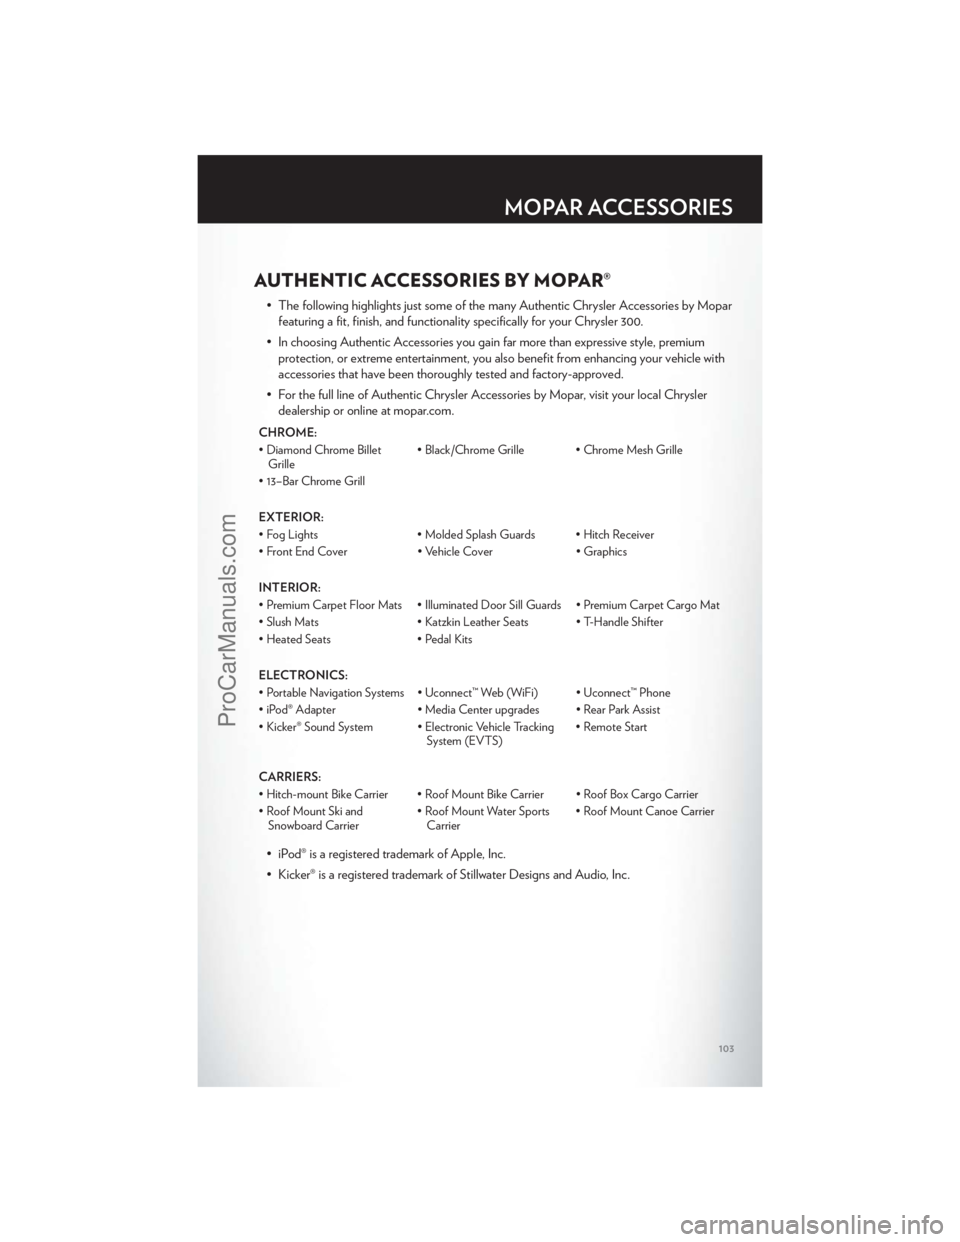 CHRYSLER 300 S 2012  Owners Manual AUTHENTIC ACCESSORIES BY MOPAR®
• The following highlights just some of the many Authentic Chrysler Accessories by Moparfeaturing a fit, finish, and functionality specifically for your Chrysler 300